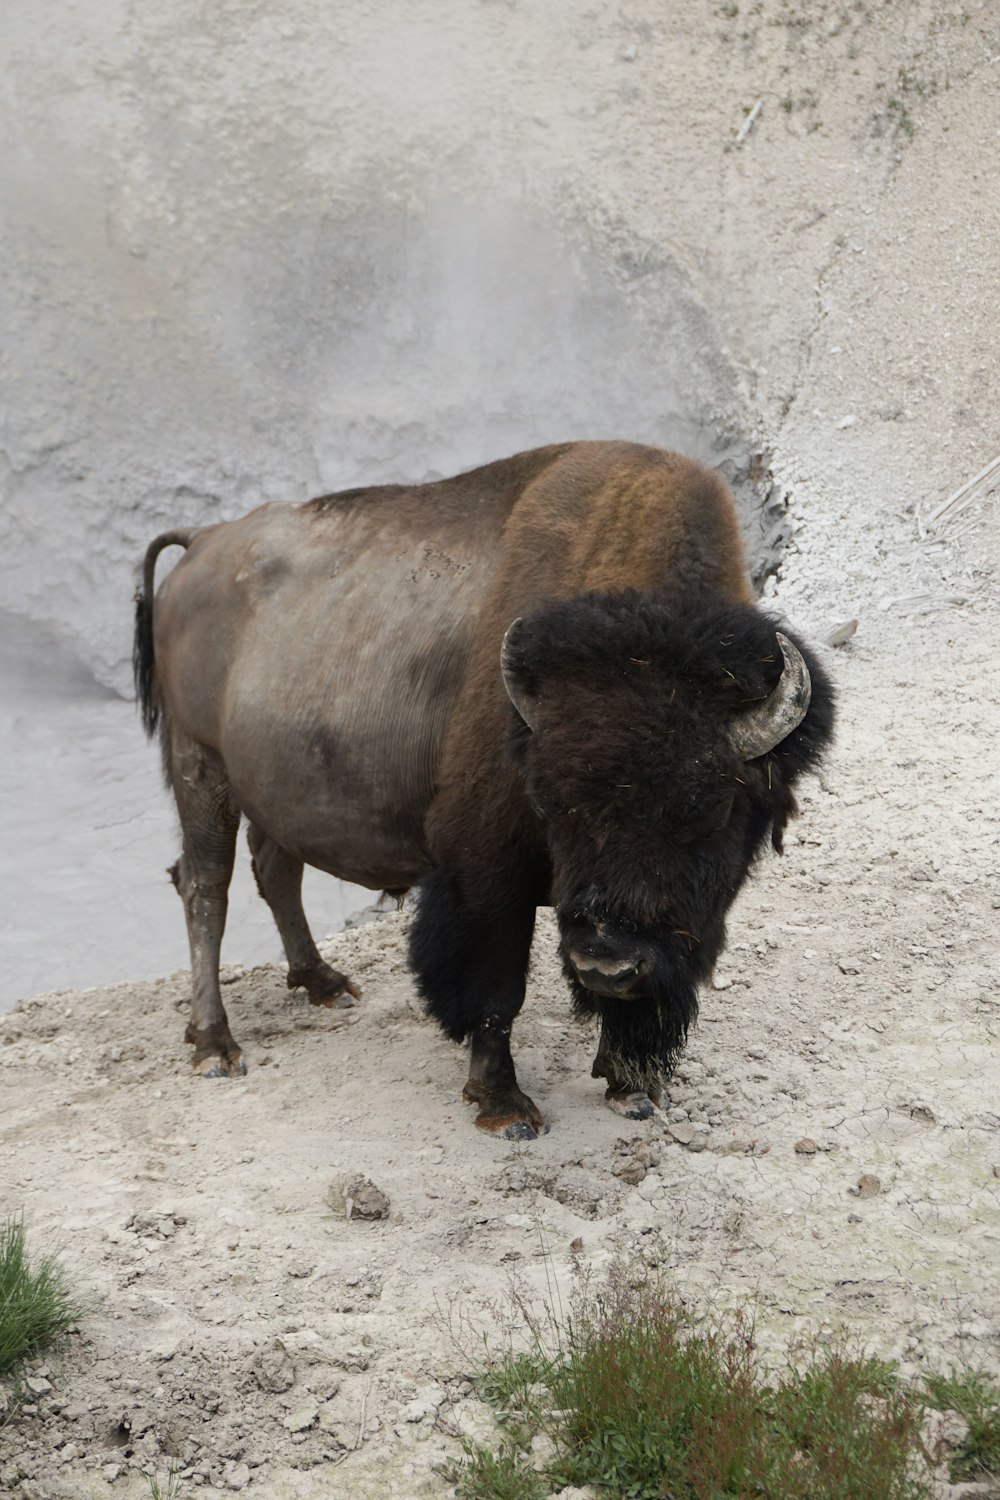 a bison is standing in the sand near a body of water